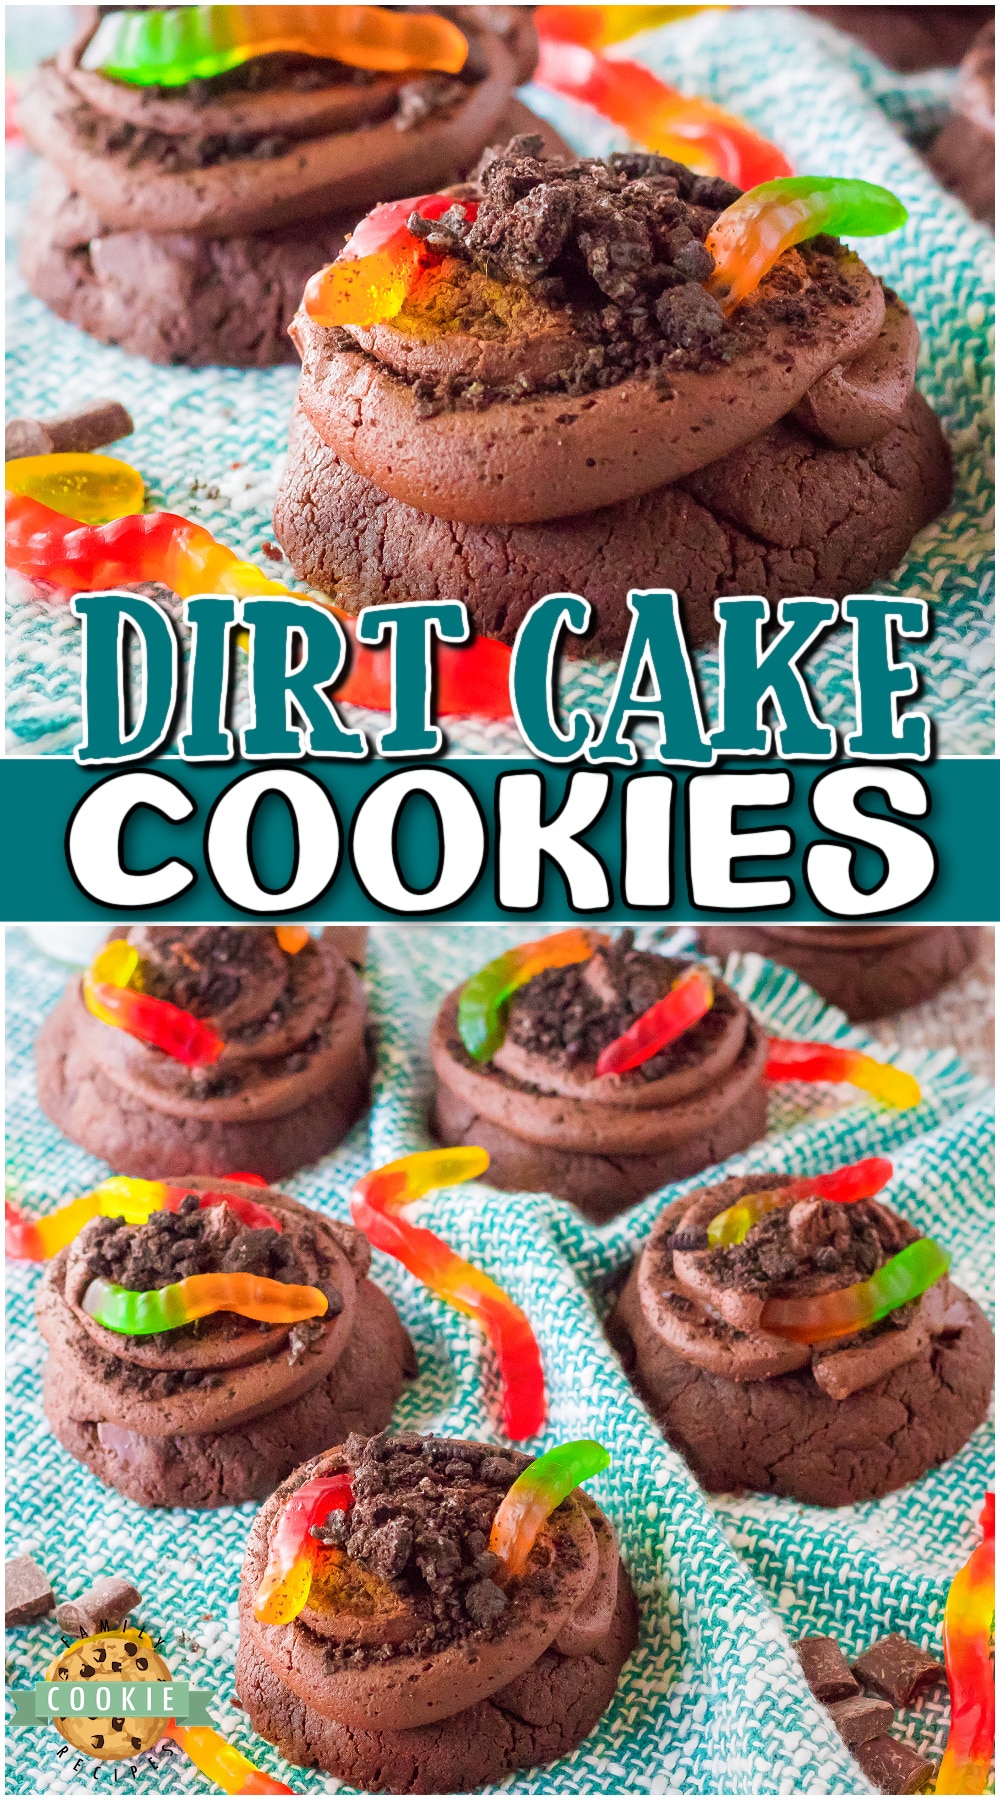 Dirt Cake Cookies are double chocolate cookies topped with Oreos, chocolate buttercream & gummy worms! Fun, chocolatey mud cookies perfect for Birthdays or anytime! via @buttergirls